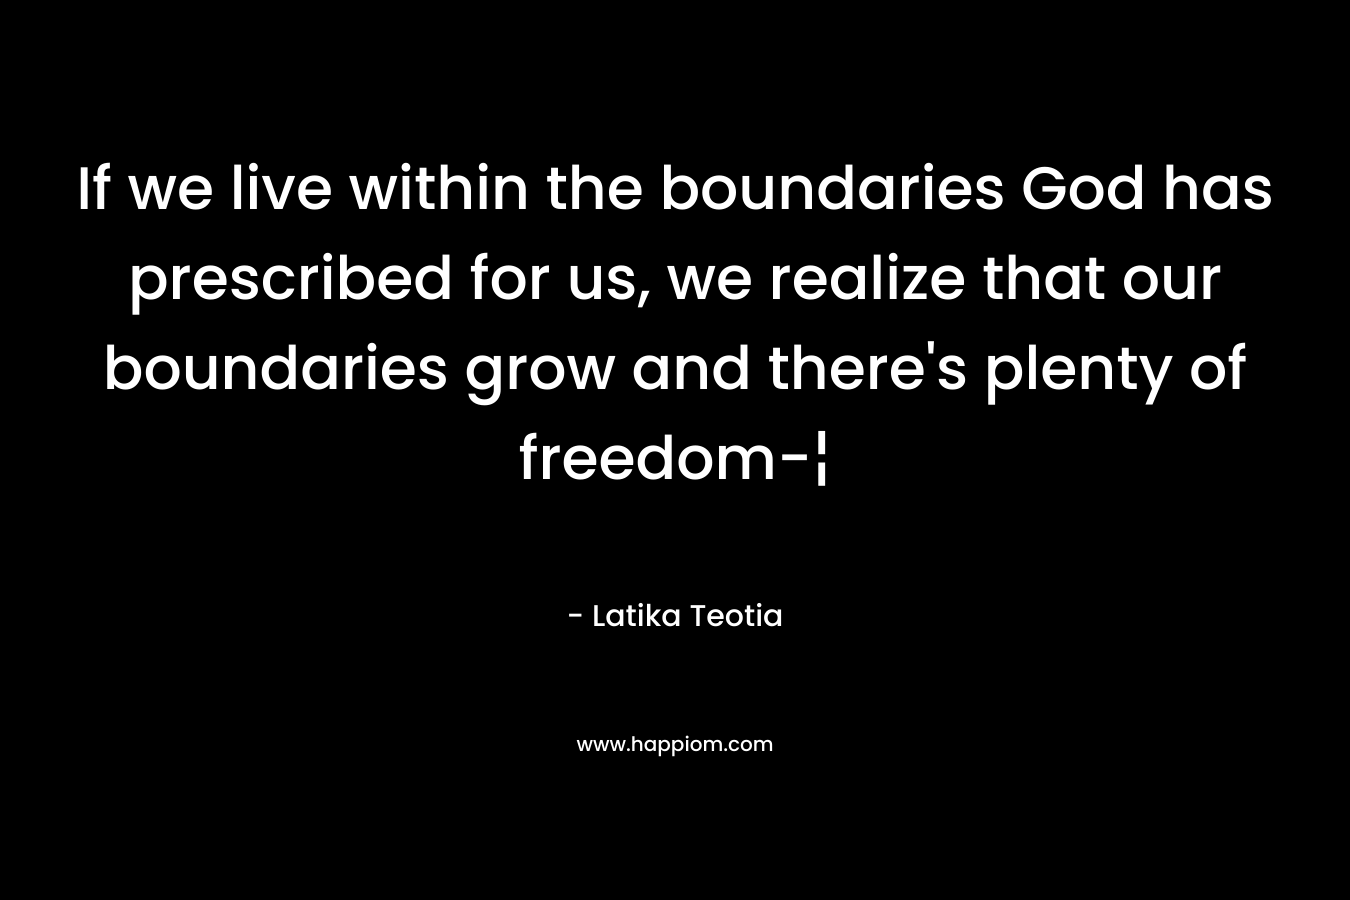 If we live within the boundaries God has prescribed for us, we realize that our boundaries grow and there’s plenty of freedom-¦ – Latika Teotia